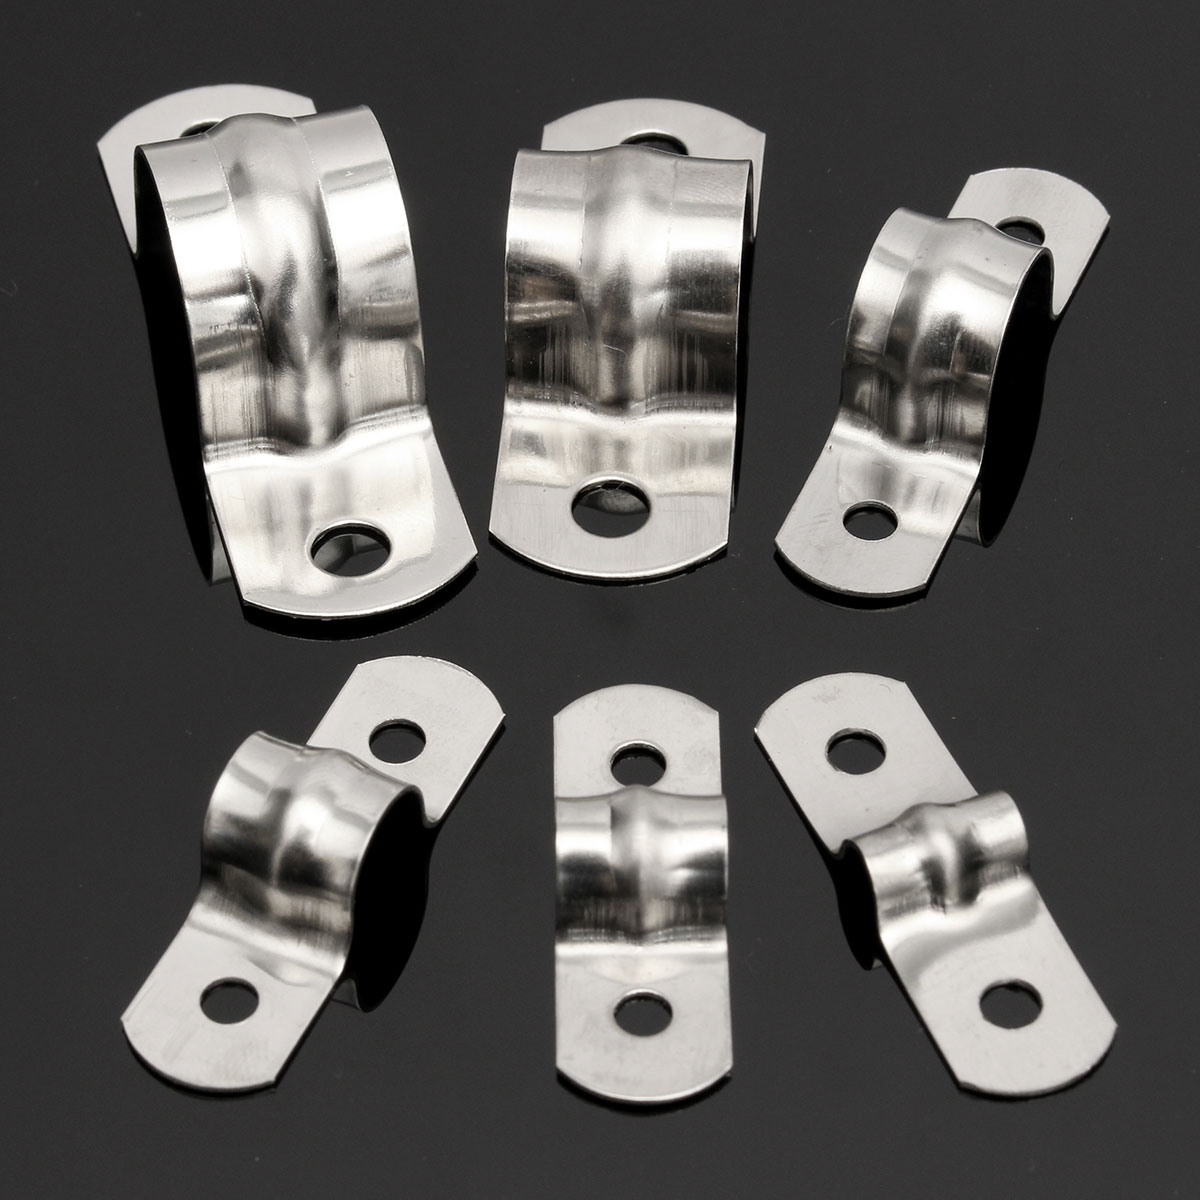 Stainless-Steel-Plumbing-Pipe-Saddle-Clip-Hose-Bracket-M5-to-M20-1046694-2